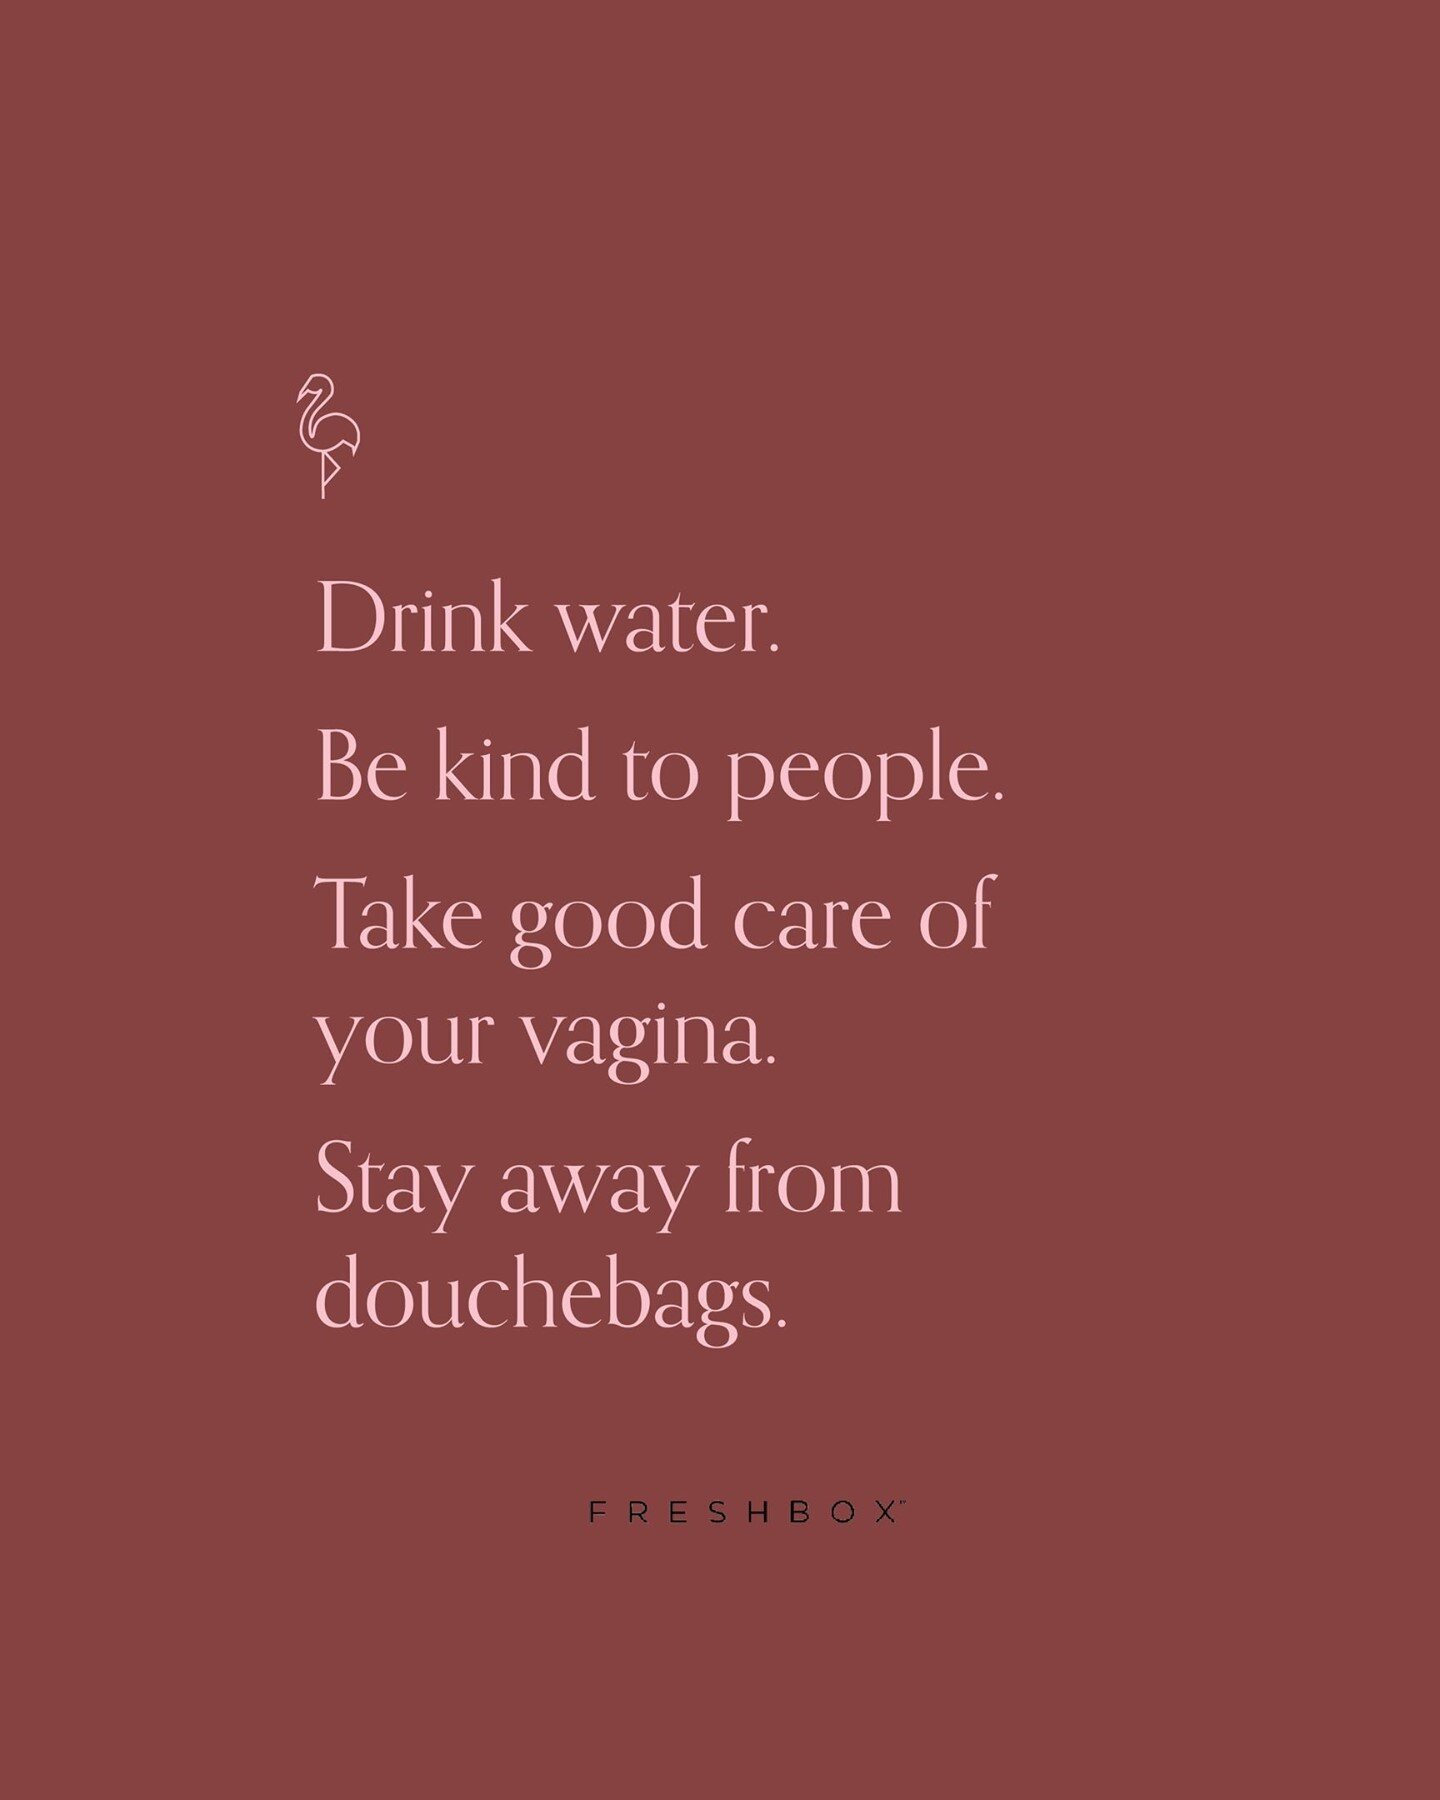 You wouldn't date a douche, so why use one down there? Douching upsets the natural balance of your vagina + can cause yeast infections or general irritations.⁠
⁠
Our all-natural mist keeps your vagina fresh by helping to control sweat, bacteria, and 